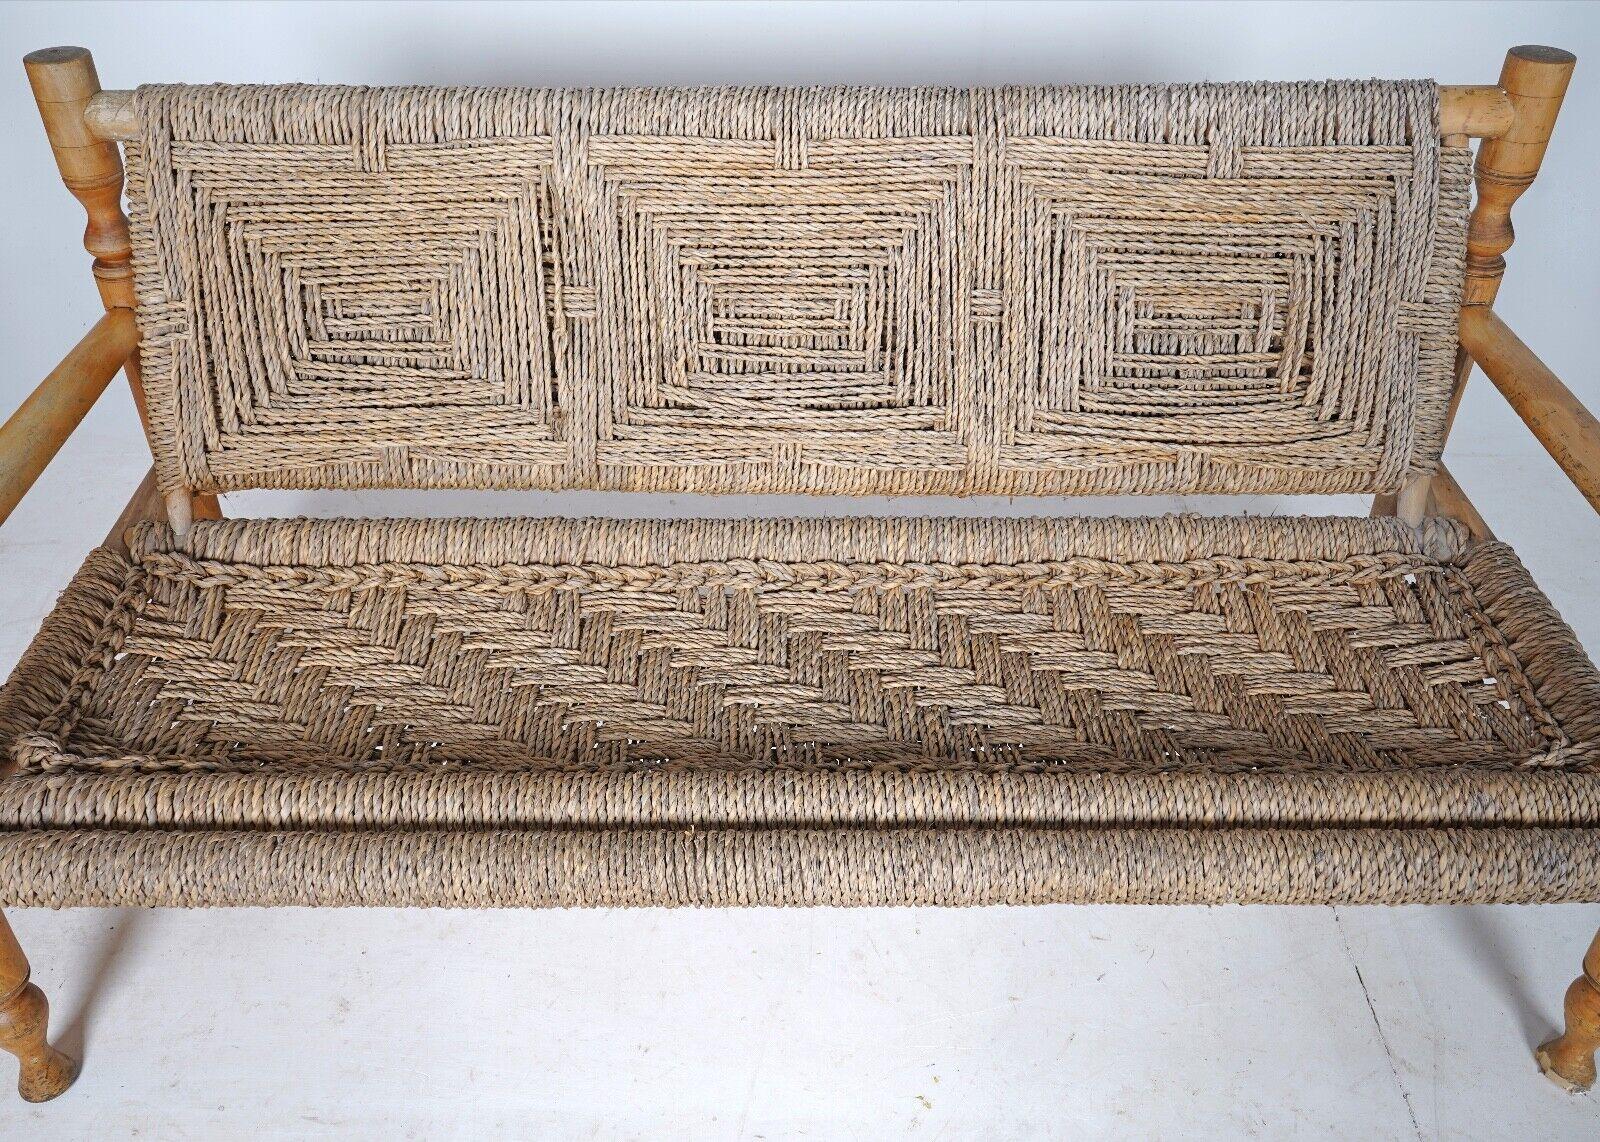 20th Century 1950's French Bench by Adrien Audoux and Frida Minnet - Hemp Rope Seat 